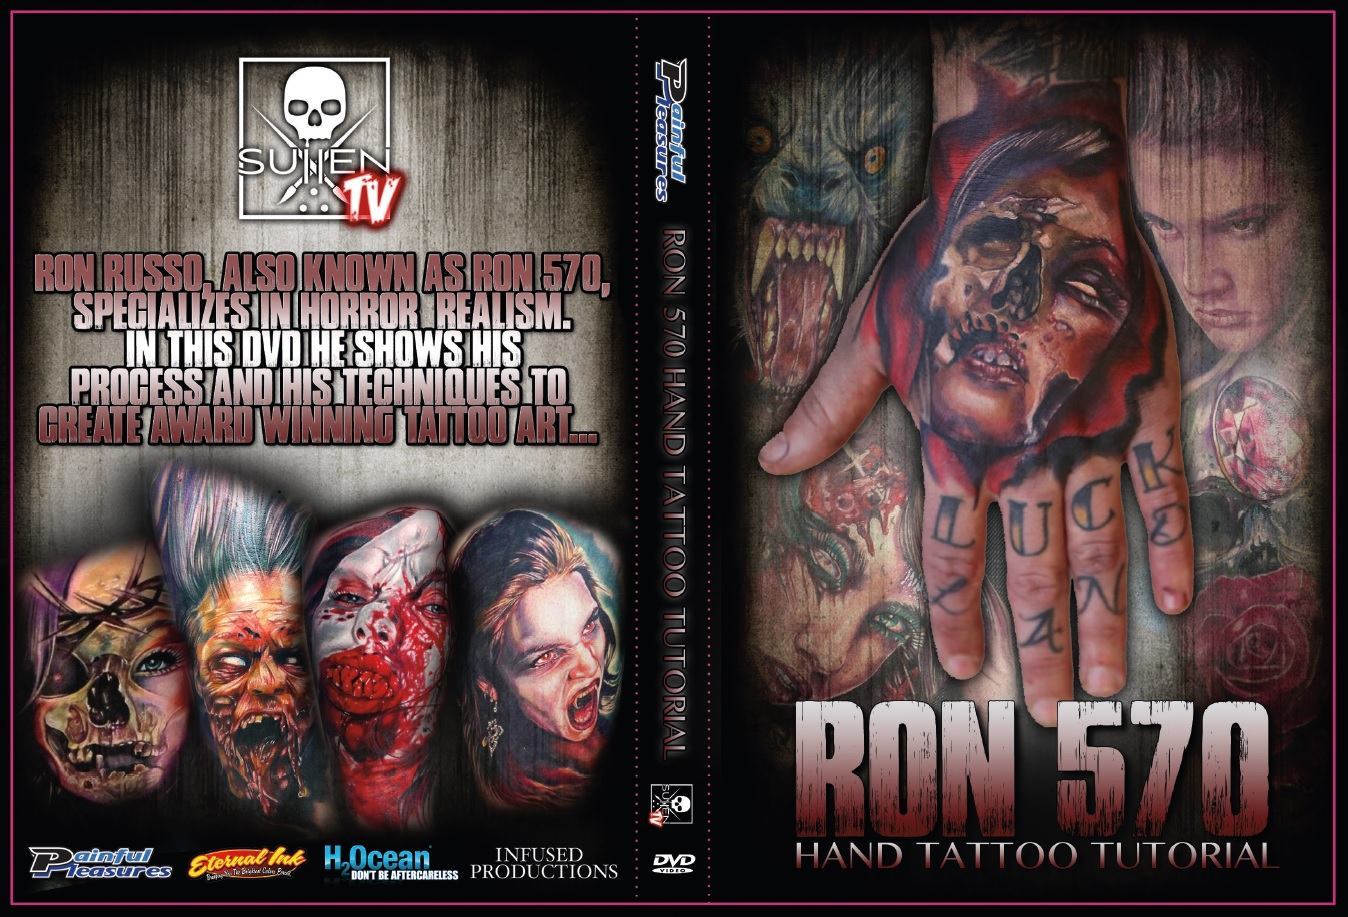 Ron Russo From Ron570 Tattooing Tattoo Tutorial DVD